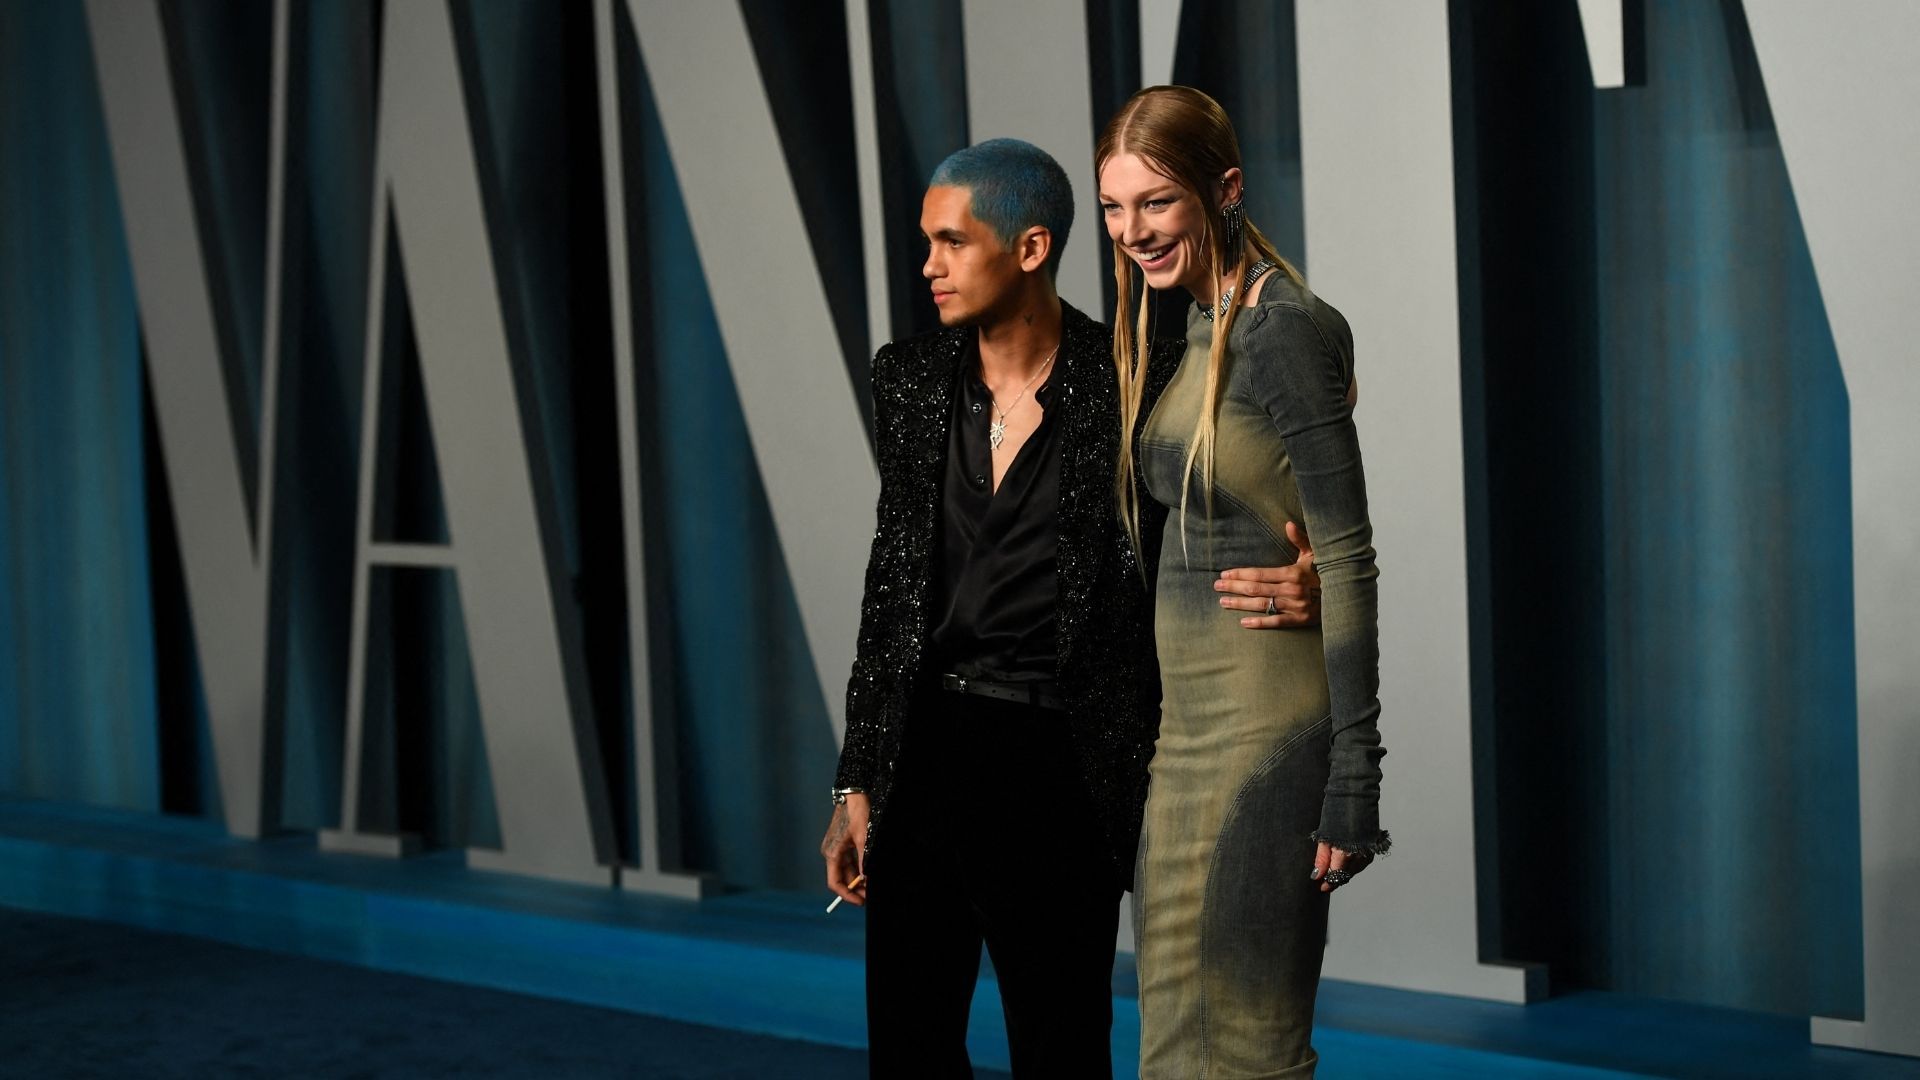 Dominic Fike and Hunter Schafer at the Vanity Fair Oscar 2022 party